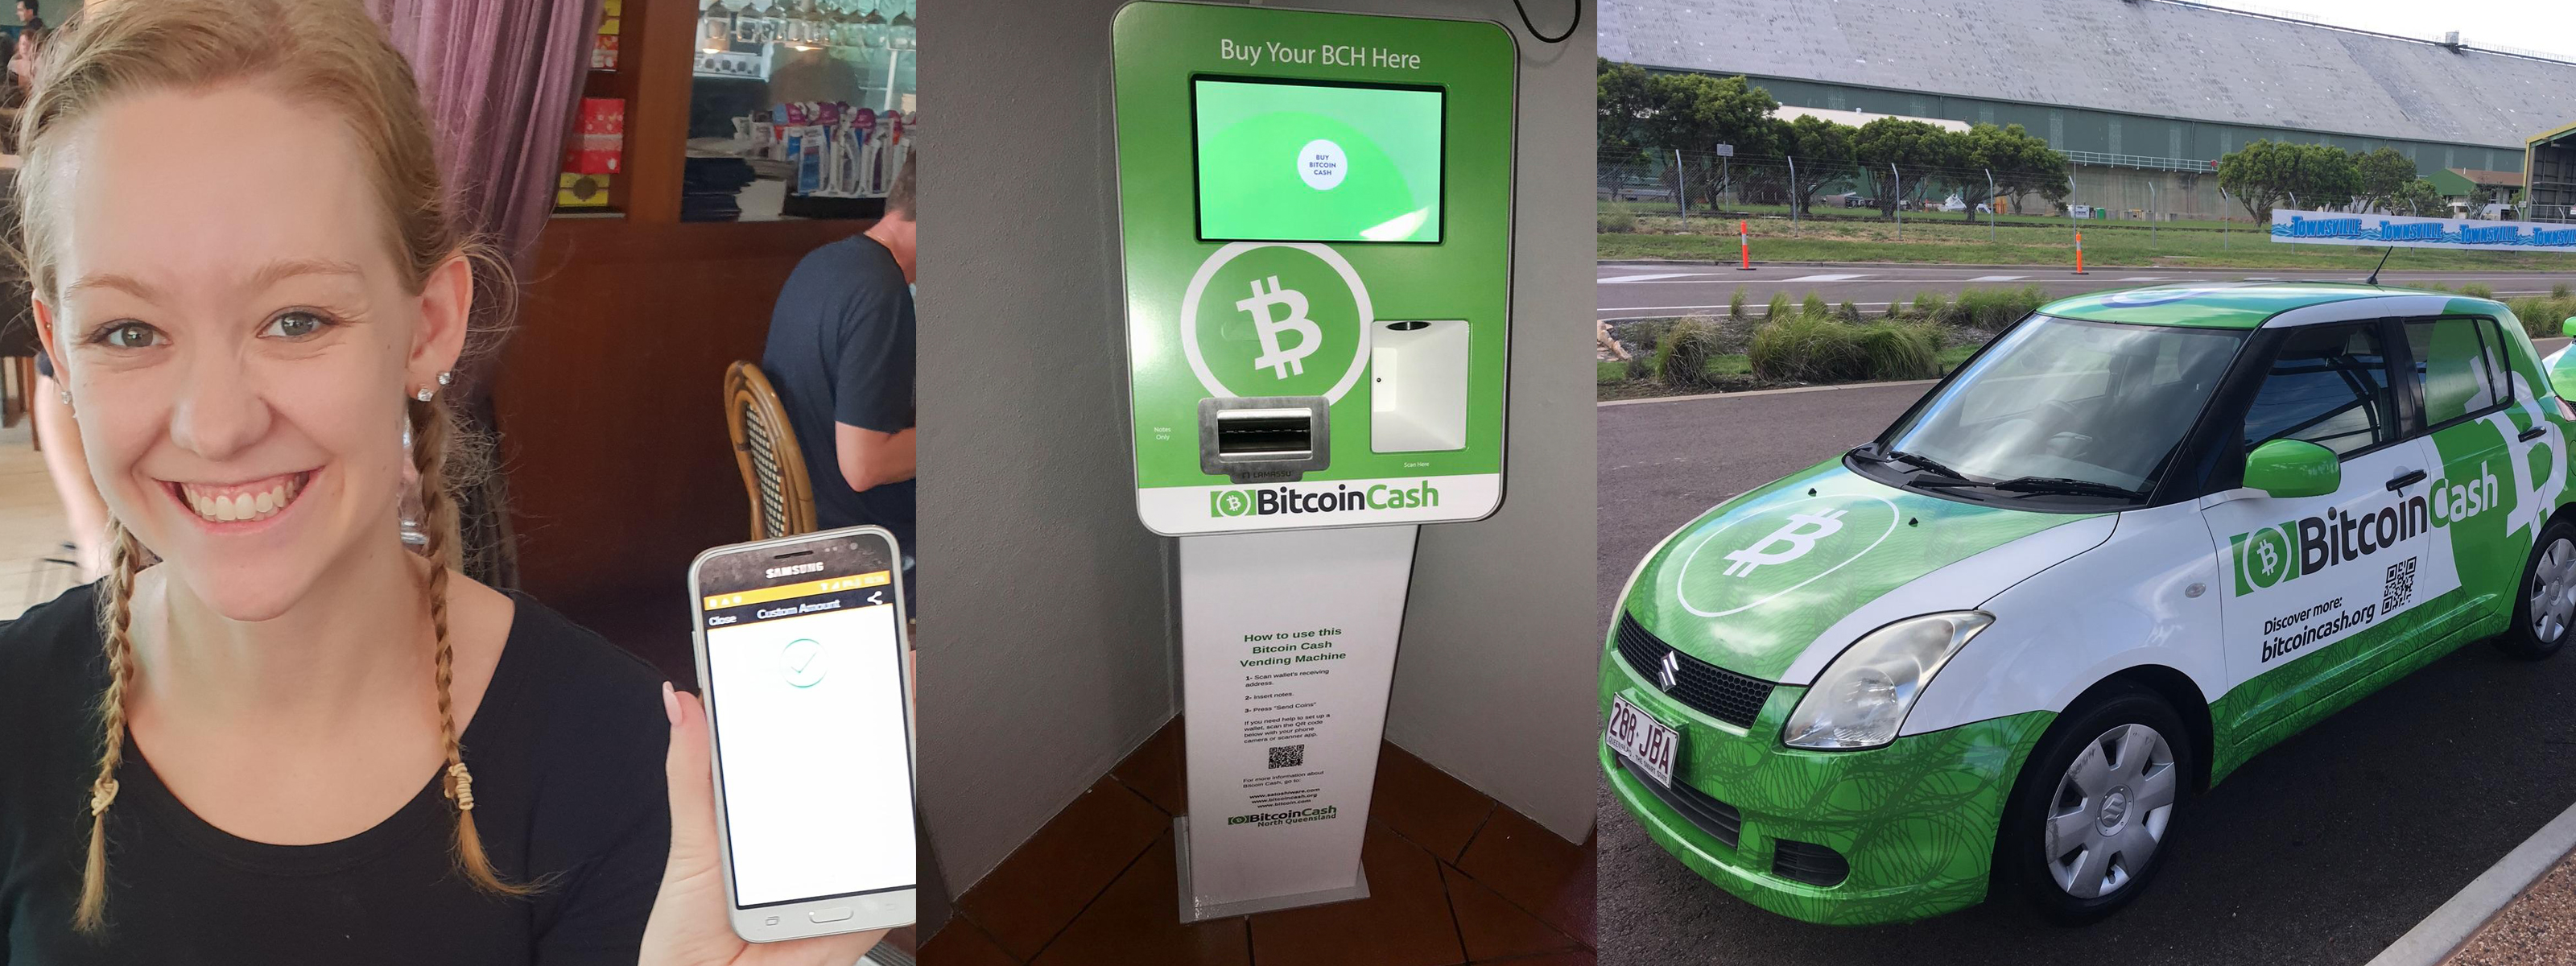 Bitcoin Cash Merchant Acceptance Is Thriving in These 3 Regions